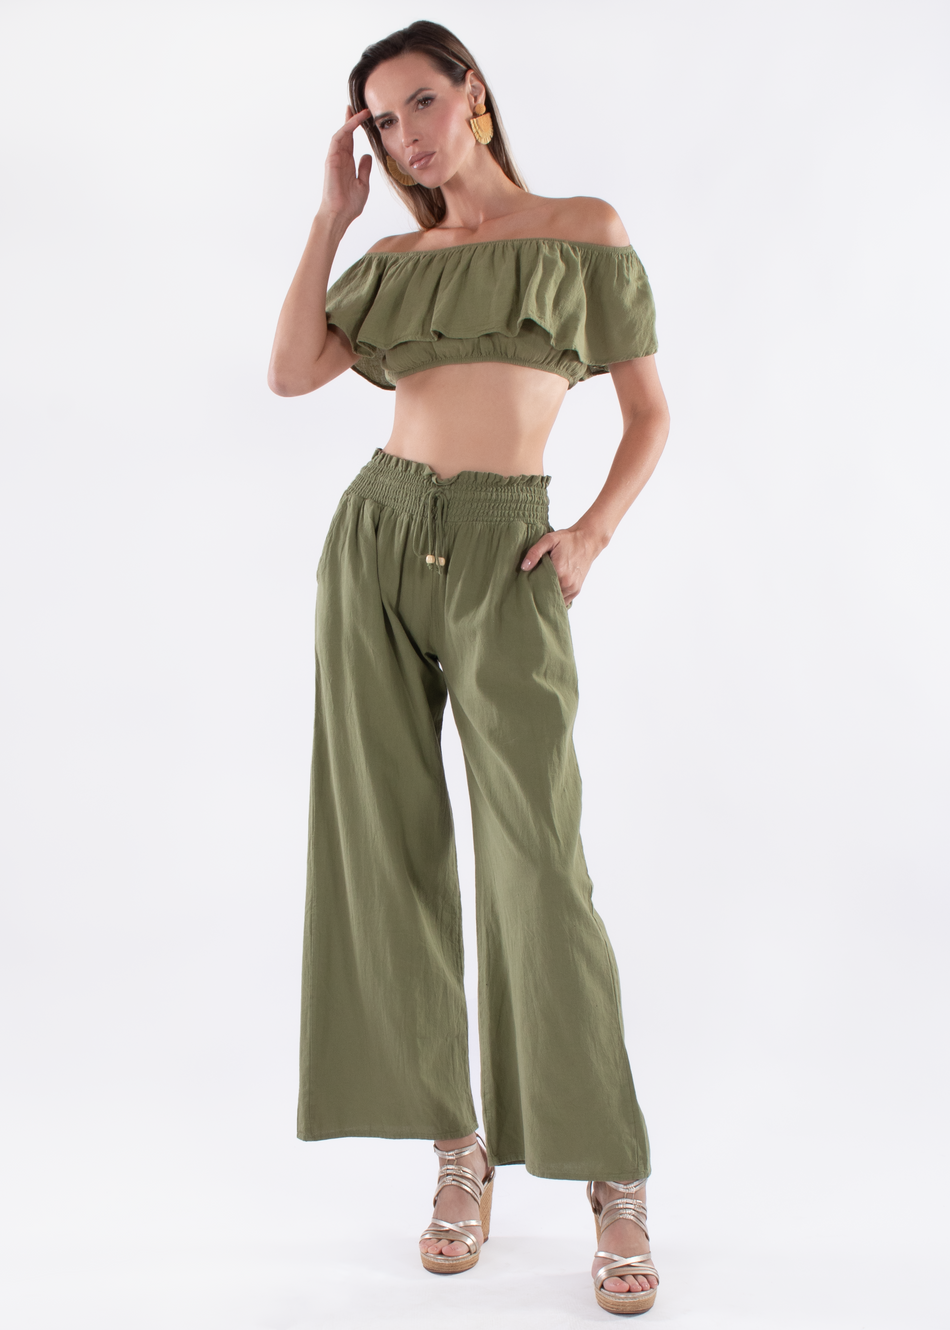 Transform your wardrobe with the Wide Leg Pant Set - Olive